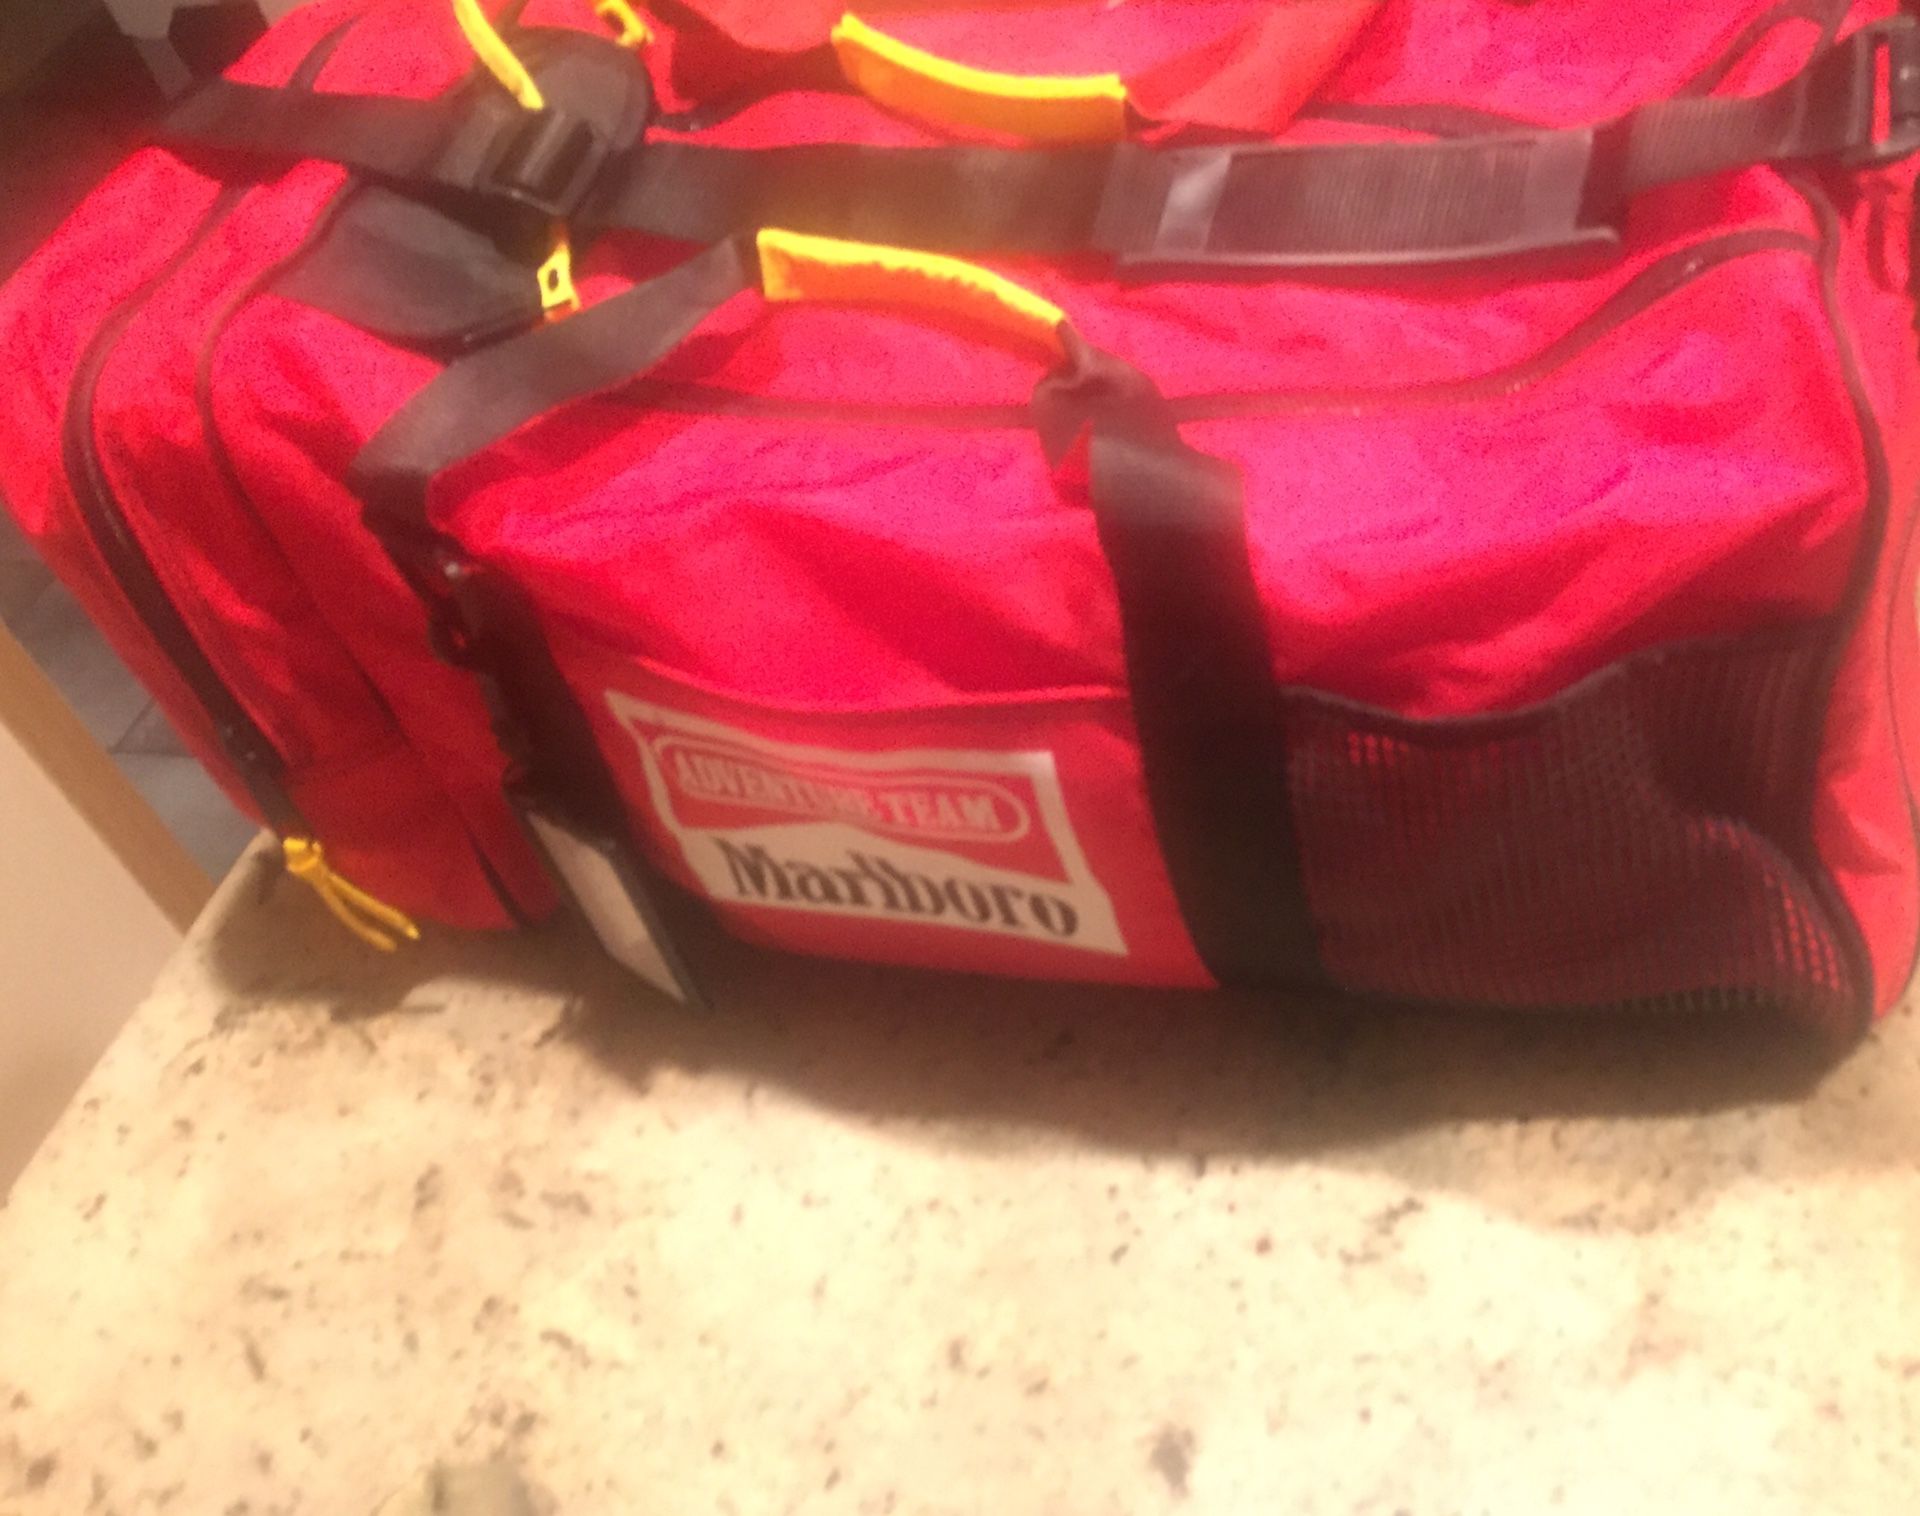 Large Marlboro duffel bags with cooler